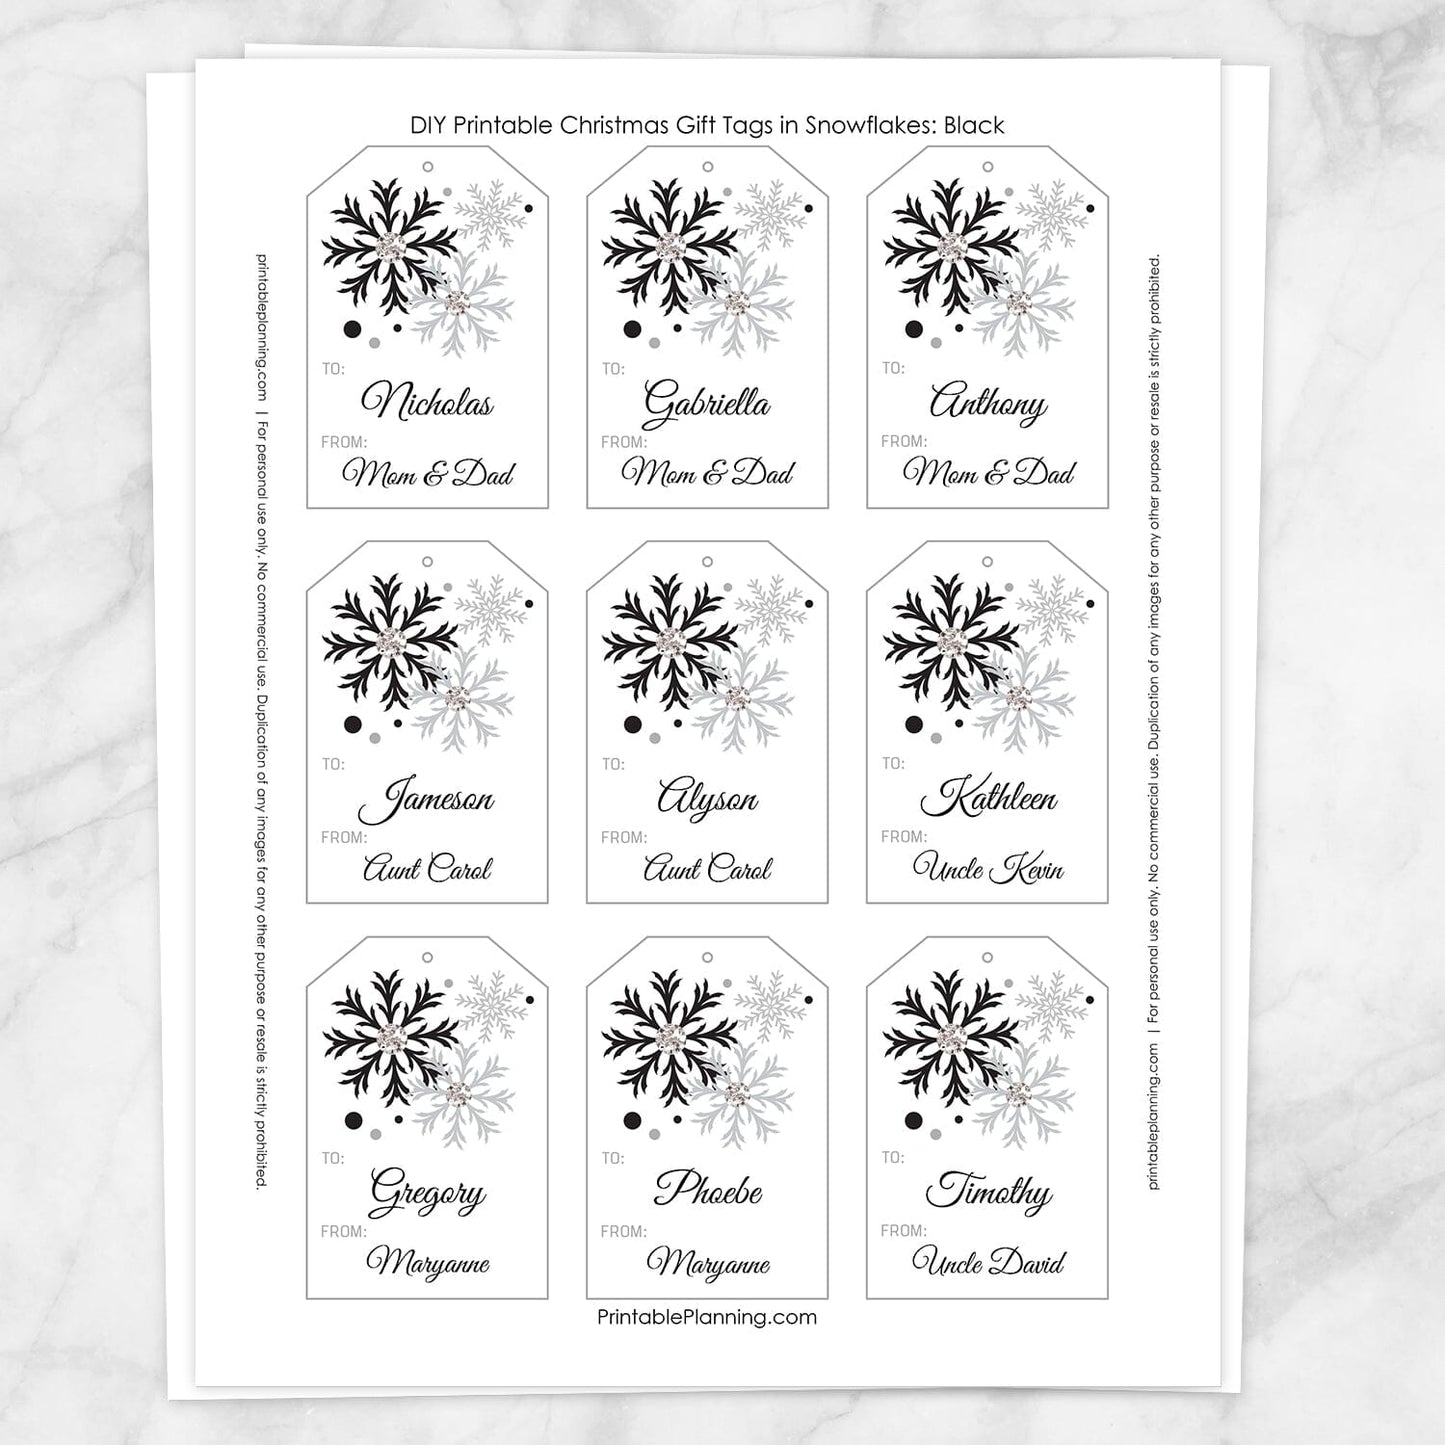 Printable Snowflake Personalized Gift Tags in Black at Printable Planning. Sheet of 9 gift tags.